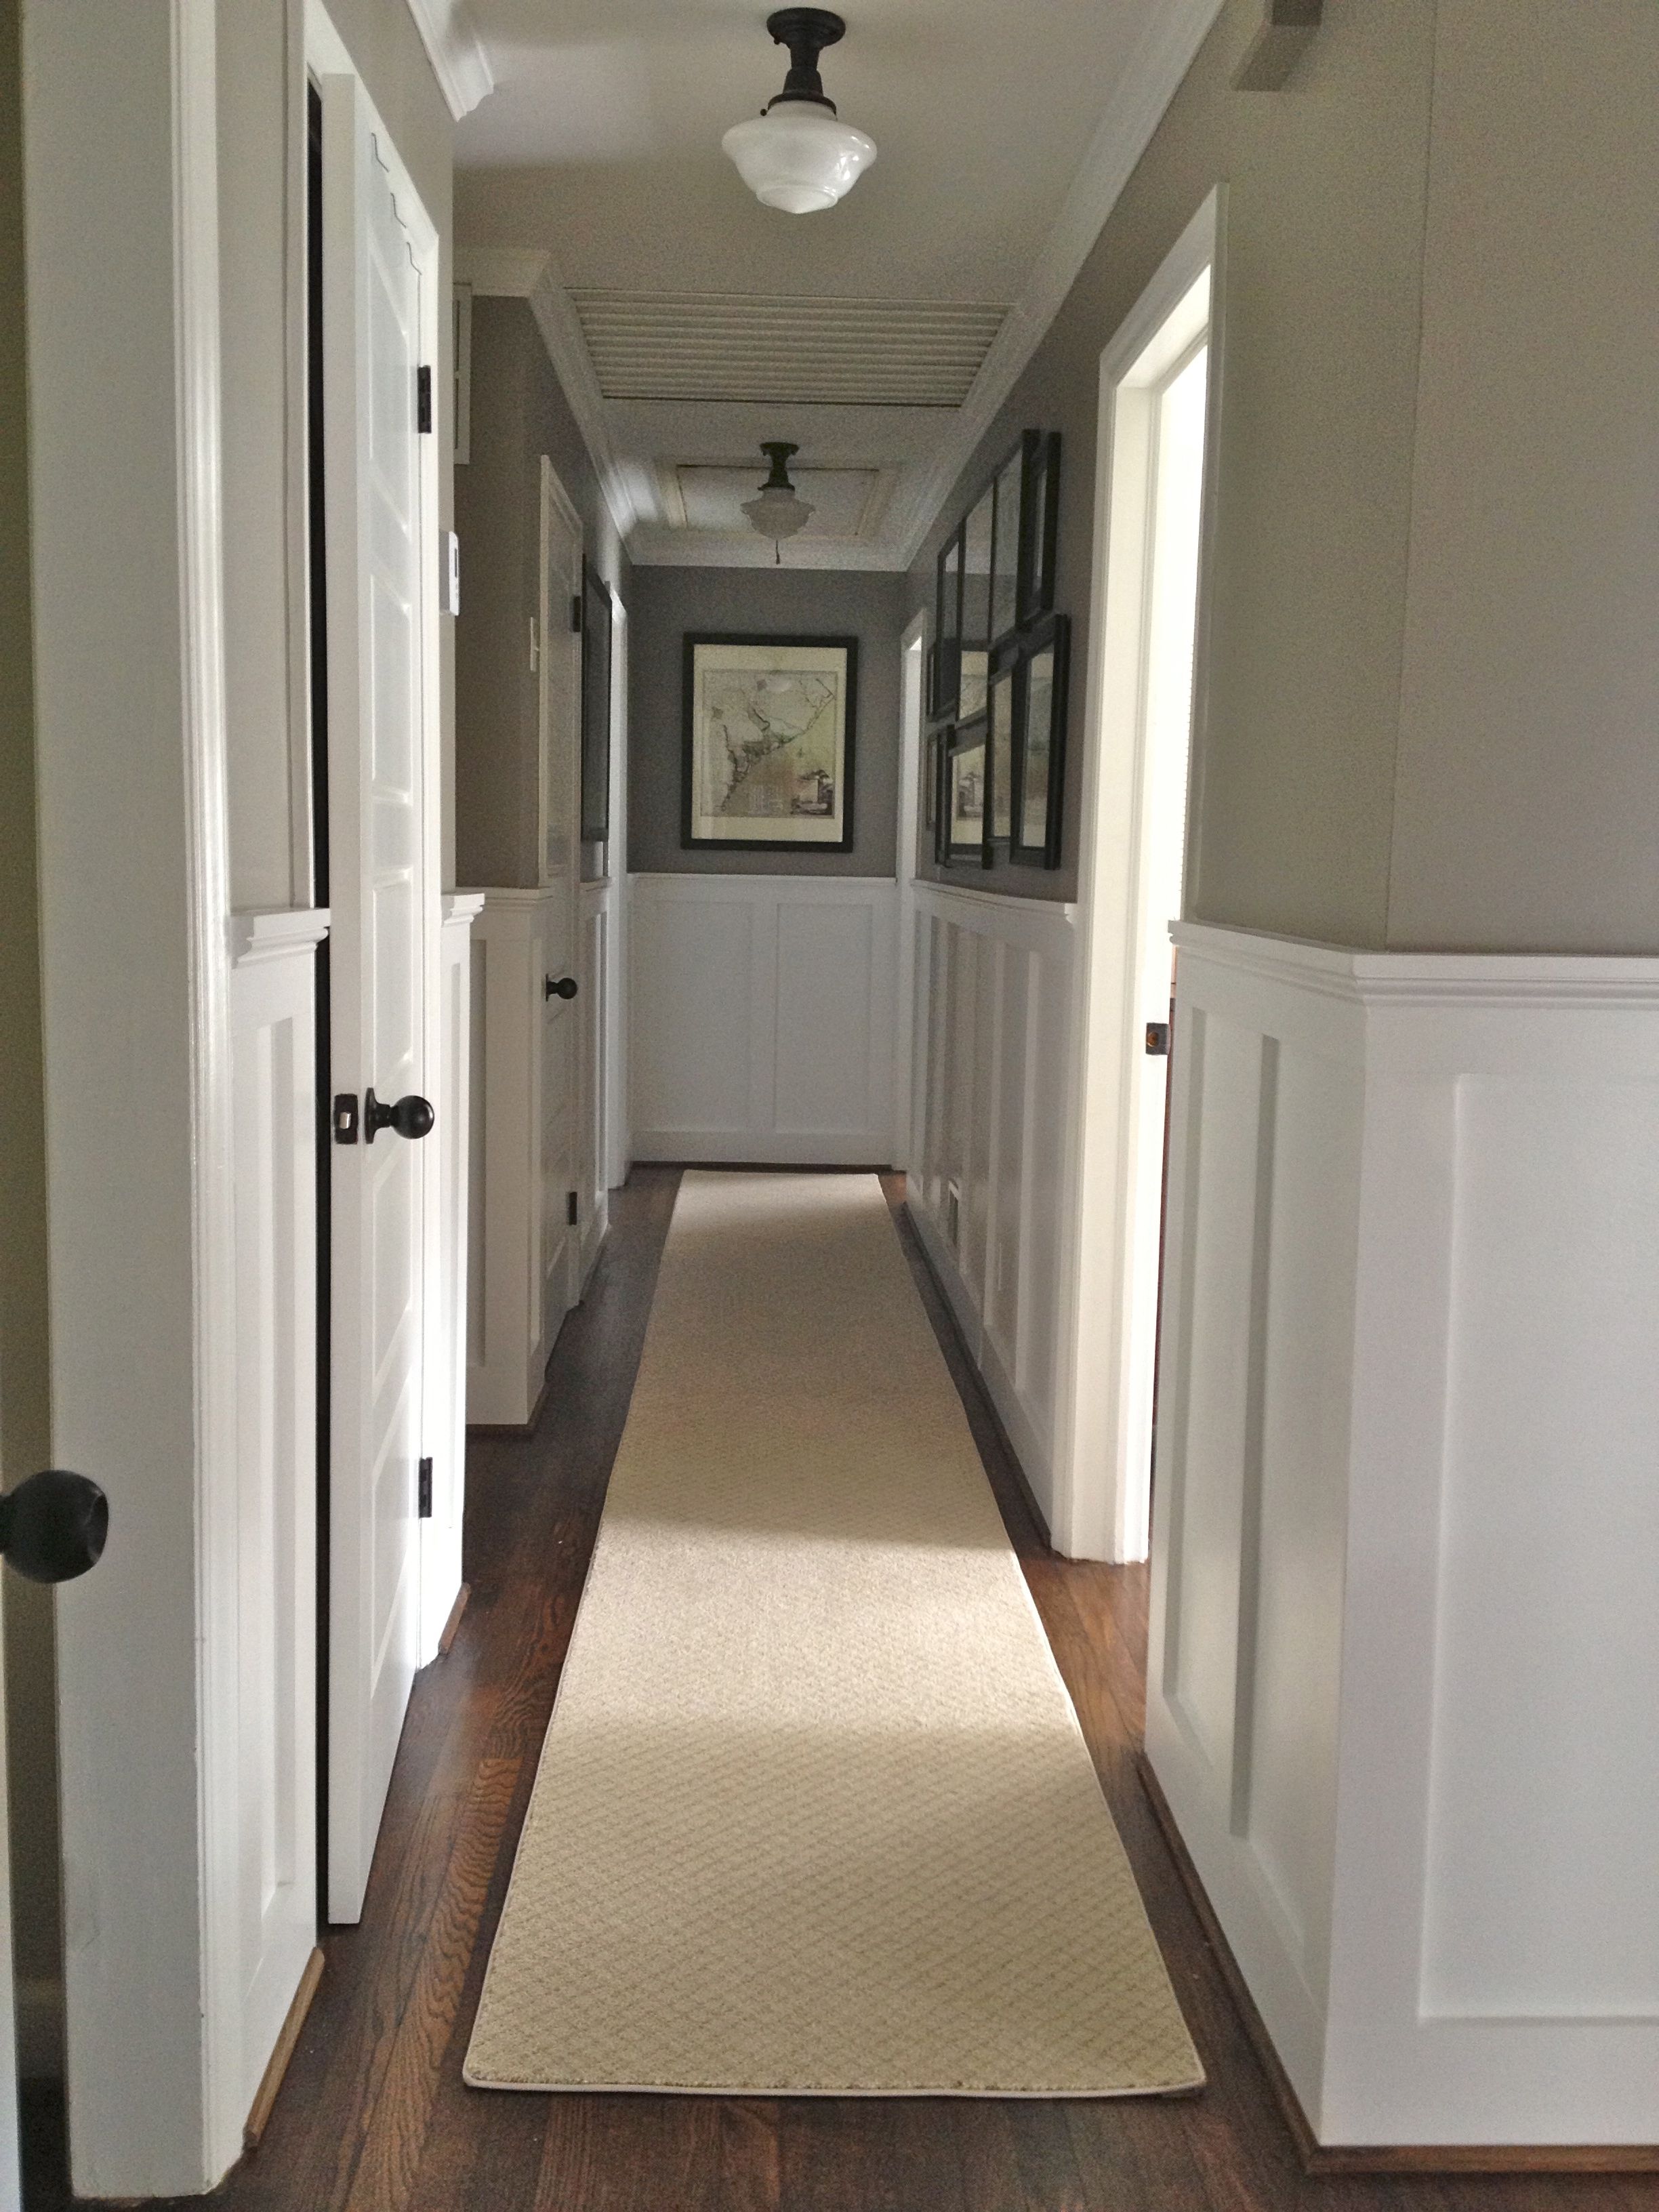 Hallway Runner Design Within Extra Long Runners For Hallway (View 2 of 20)